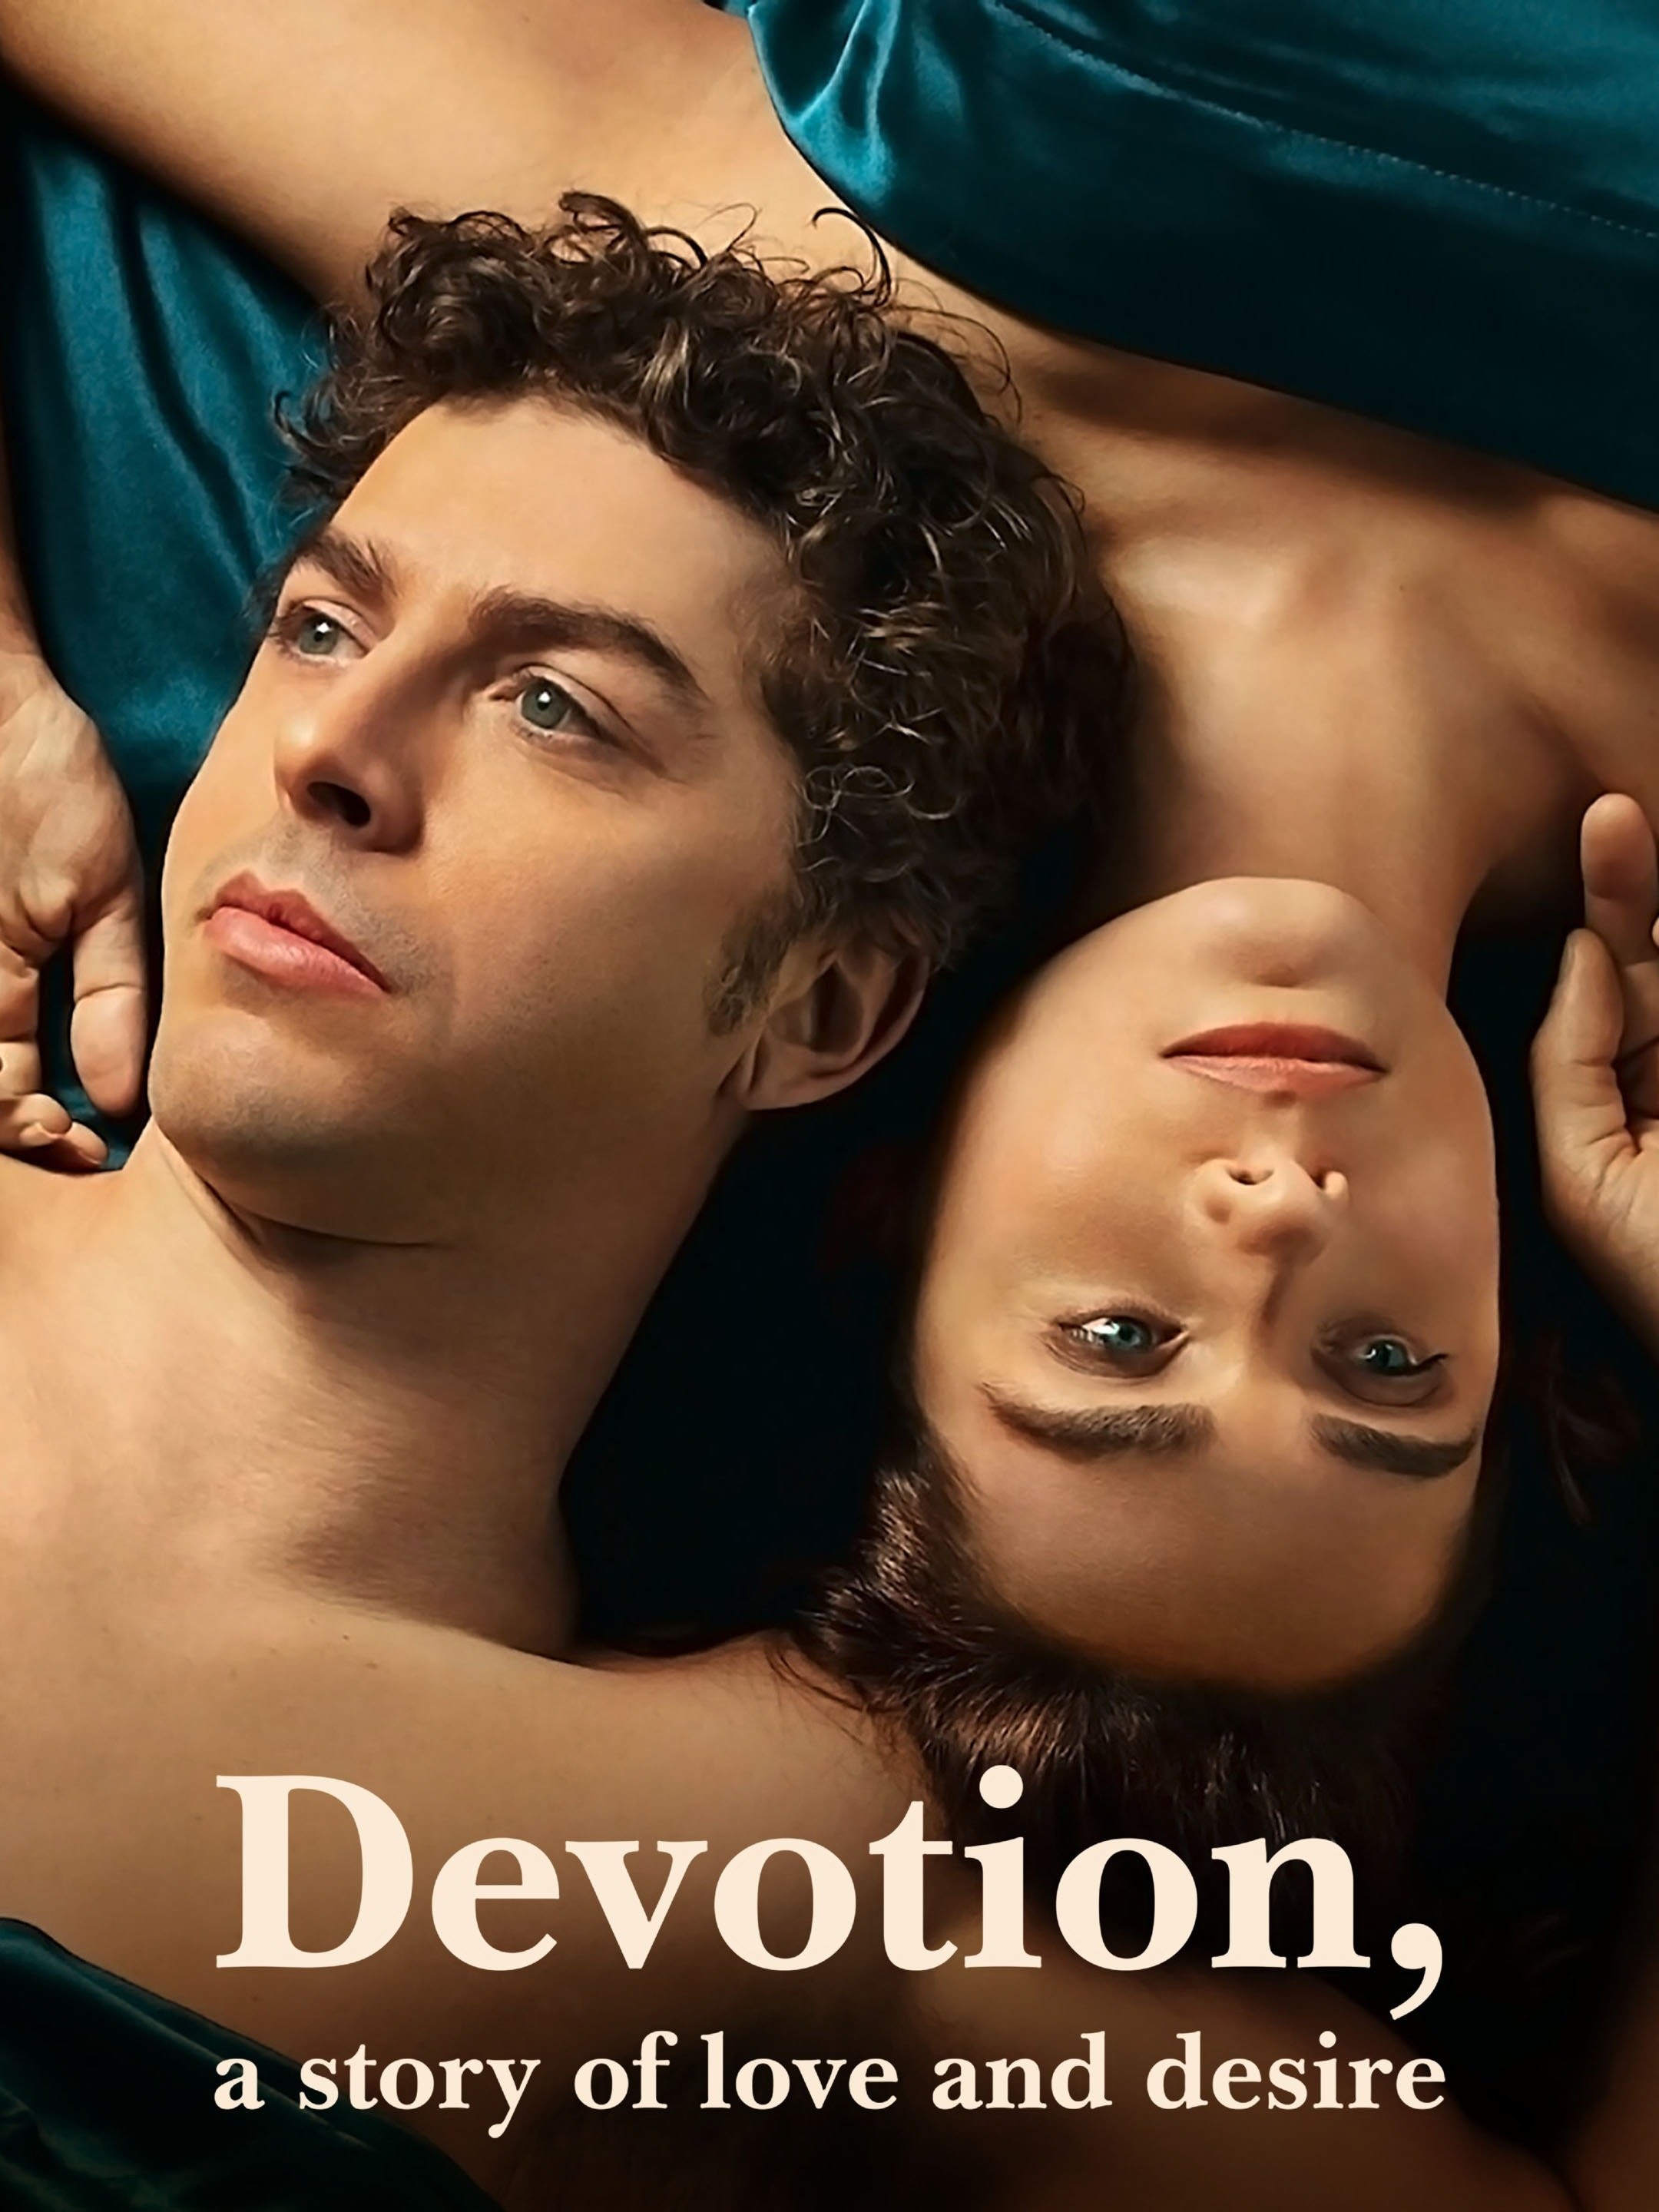 Devotion, a Story of Love and Desire: Season 1